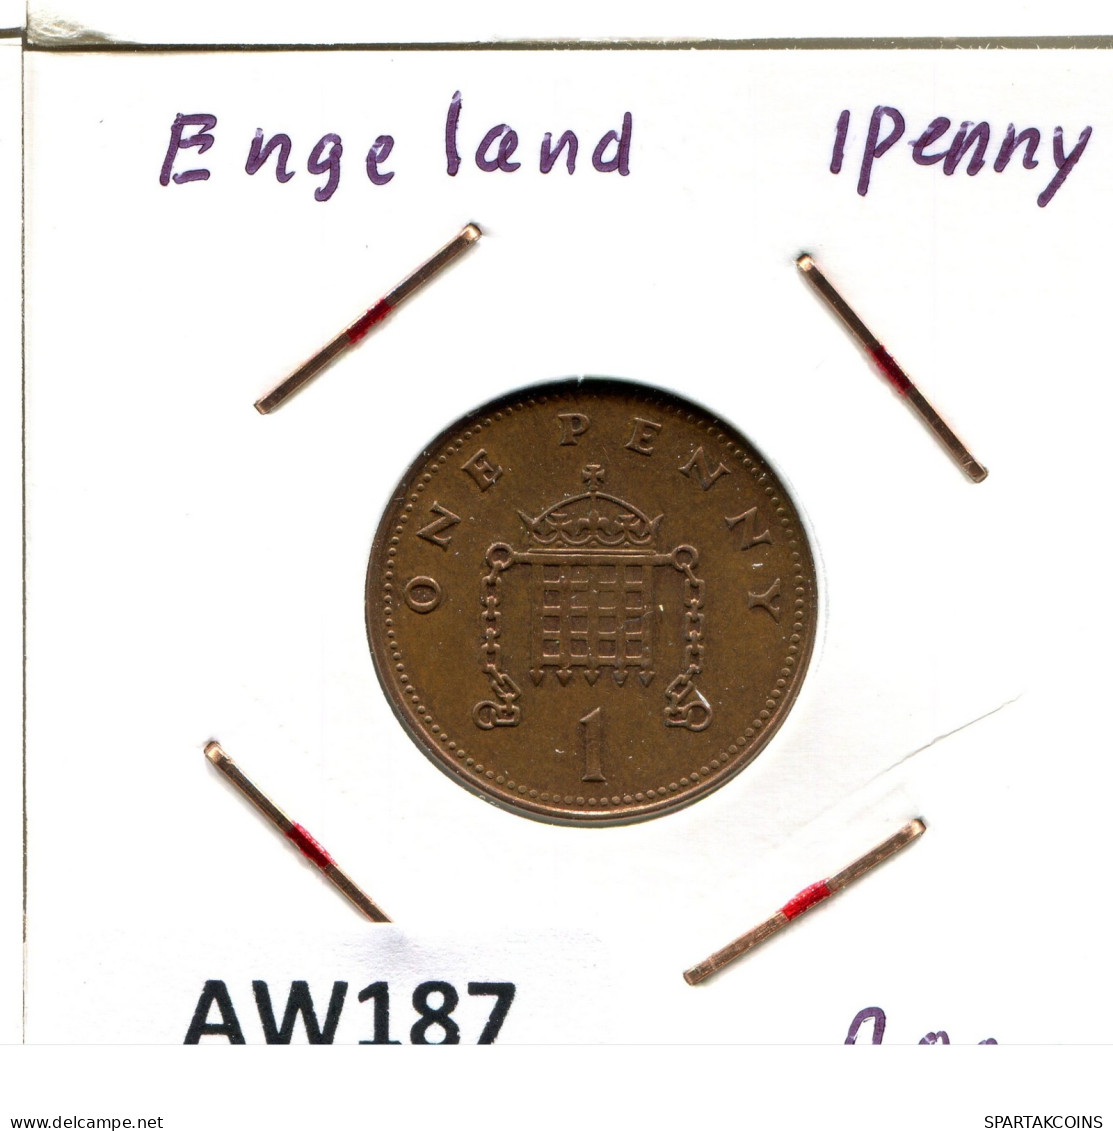 2007 PENNY UK GROßBRITANNIEN GREAT BRITAIN Münze #AW187.D.A - 1 Penny & 1 New Penny